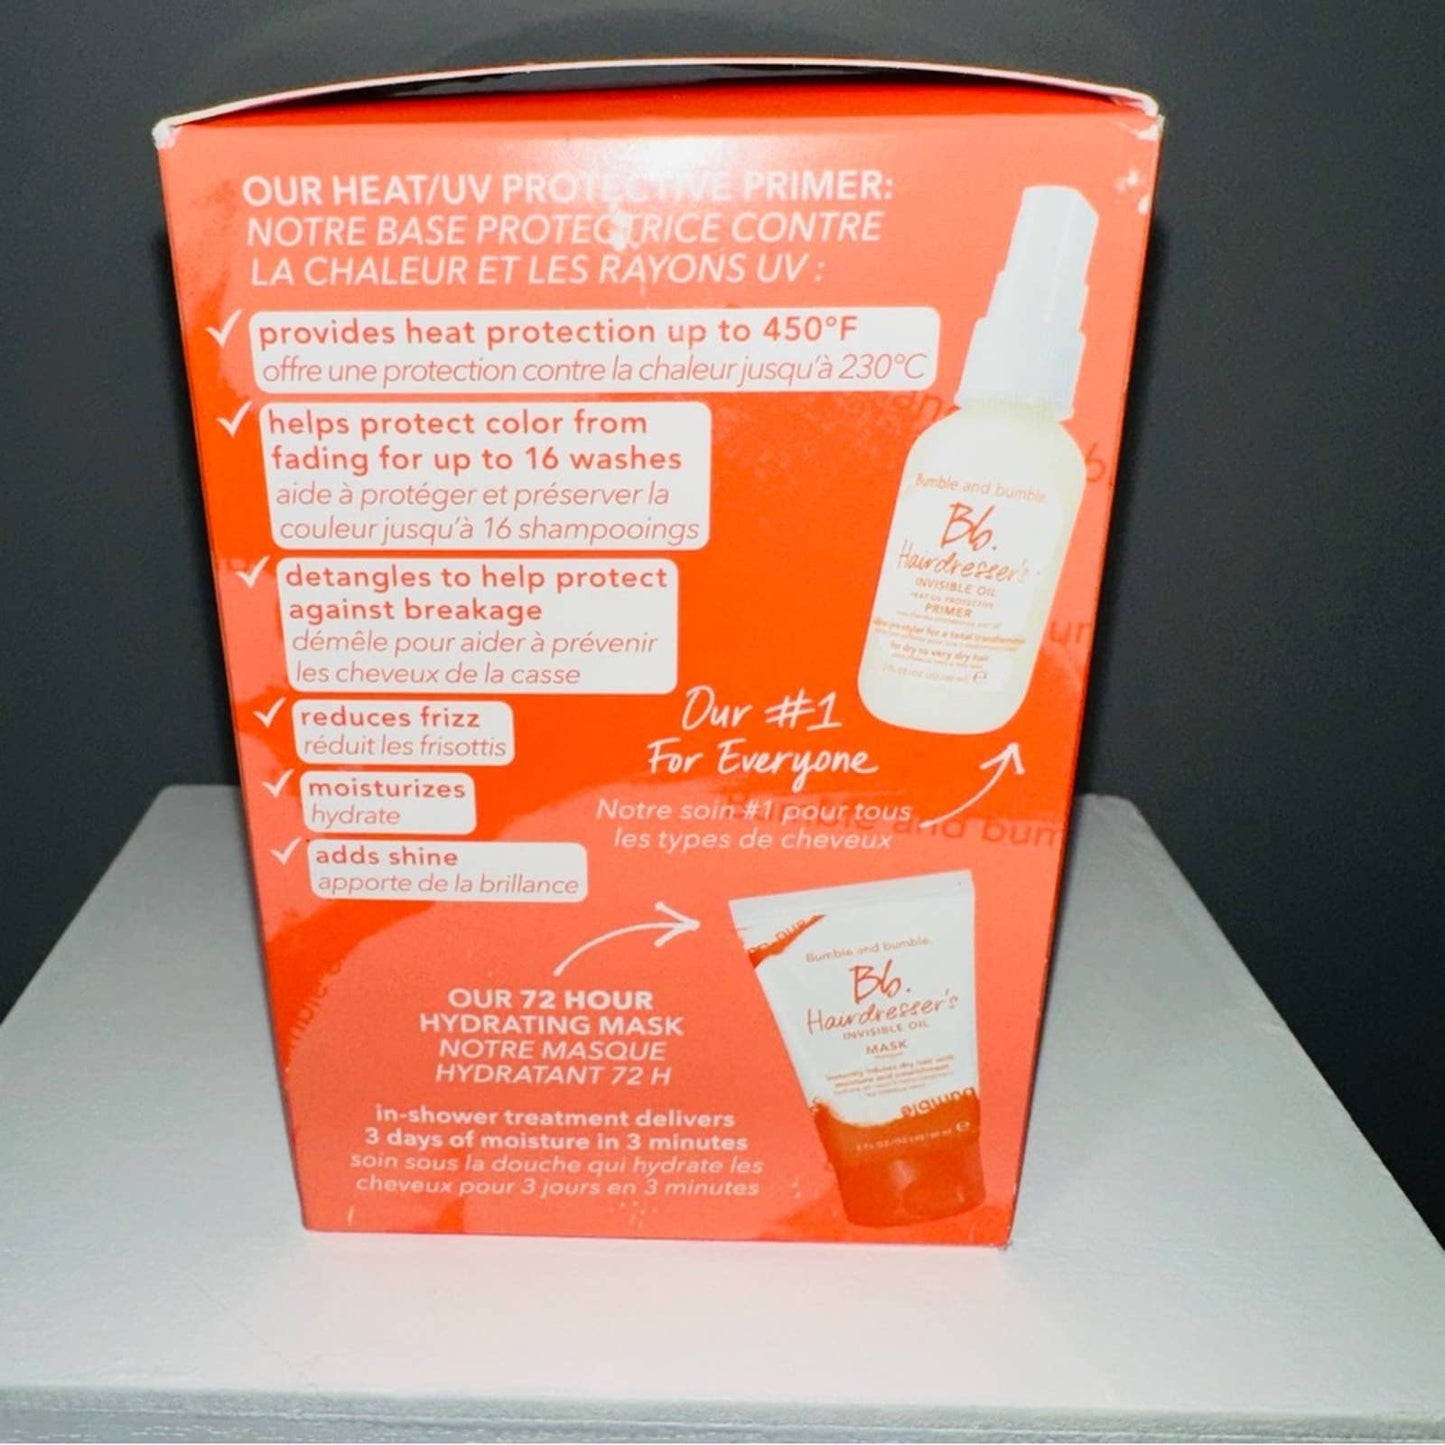 Bumble and Bumble Hairdresser's Invisible Oil Hydrating Set CLEARANCE!